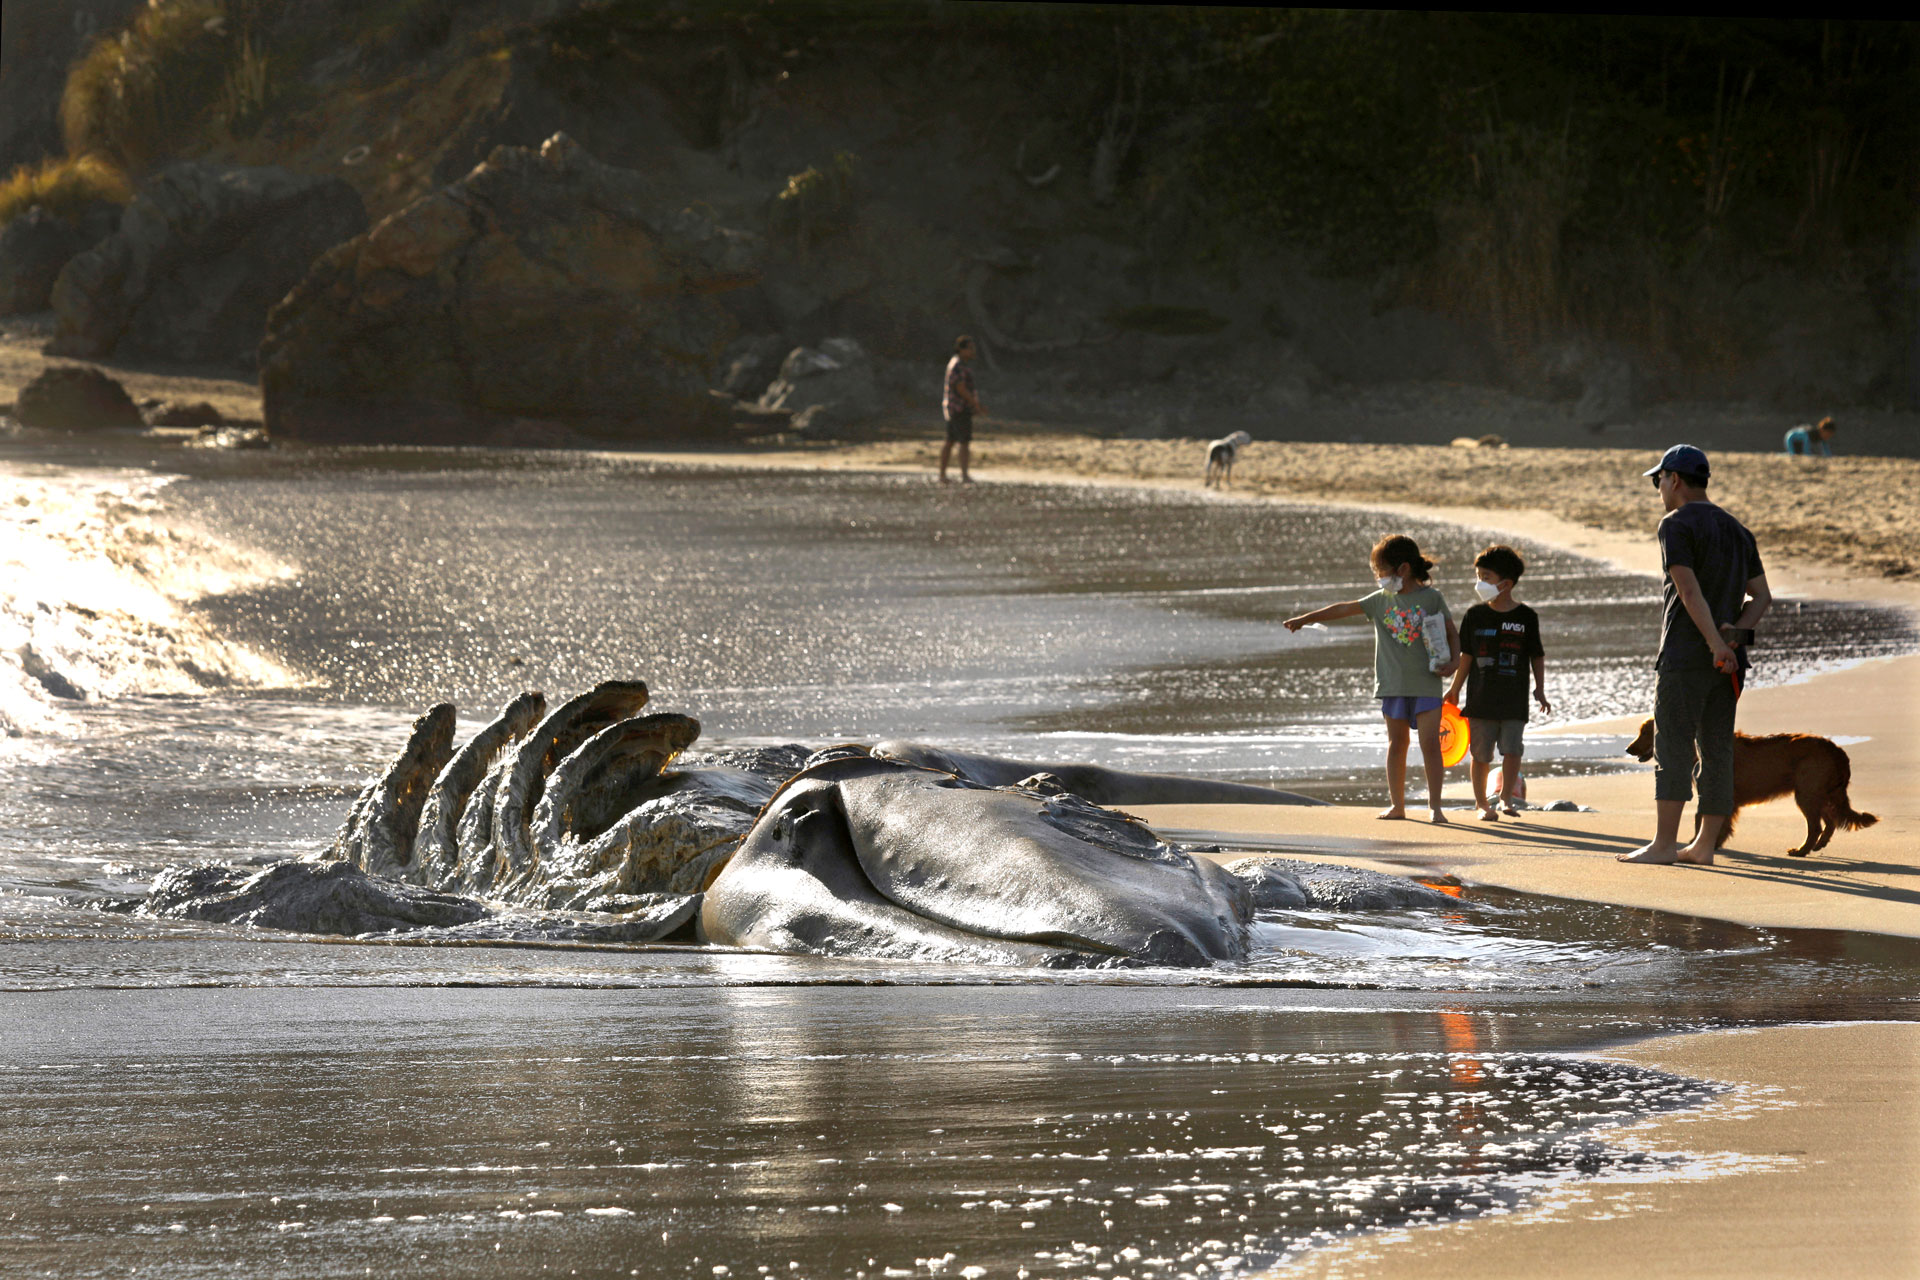 Beachgoers look at a decomposing gray whale while visiting Muir Beach on April 17, 2021. Scientists from the Marine Mammal Center in Sausalito, Calif., found evidence the whale had been struck by a vessel.